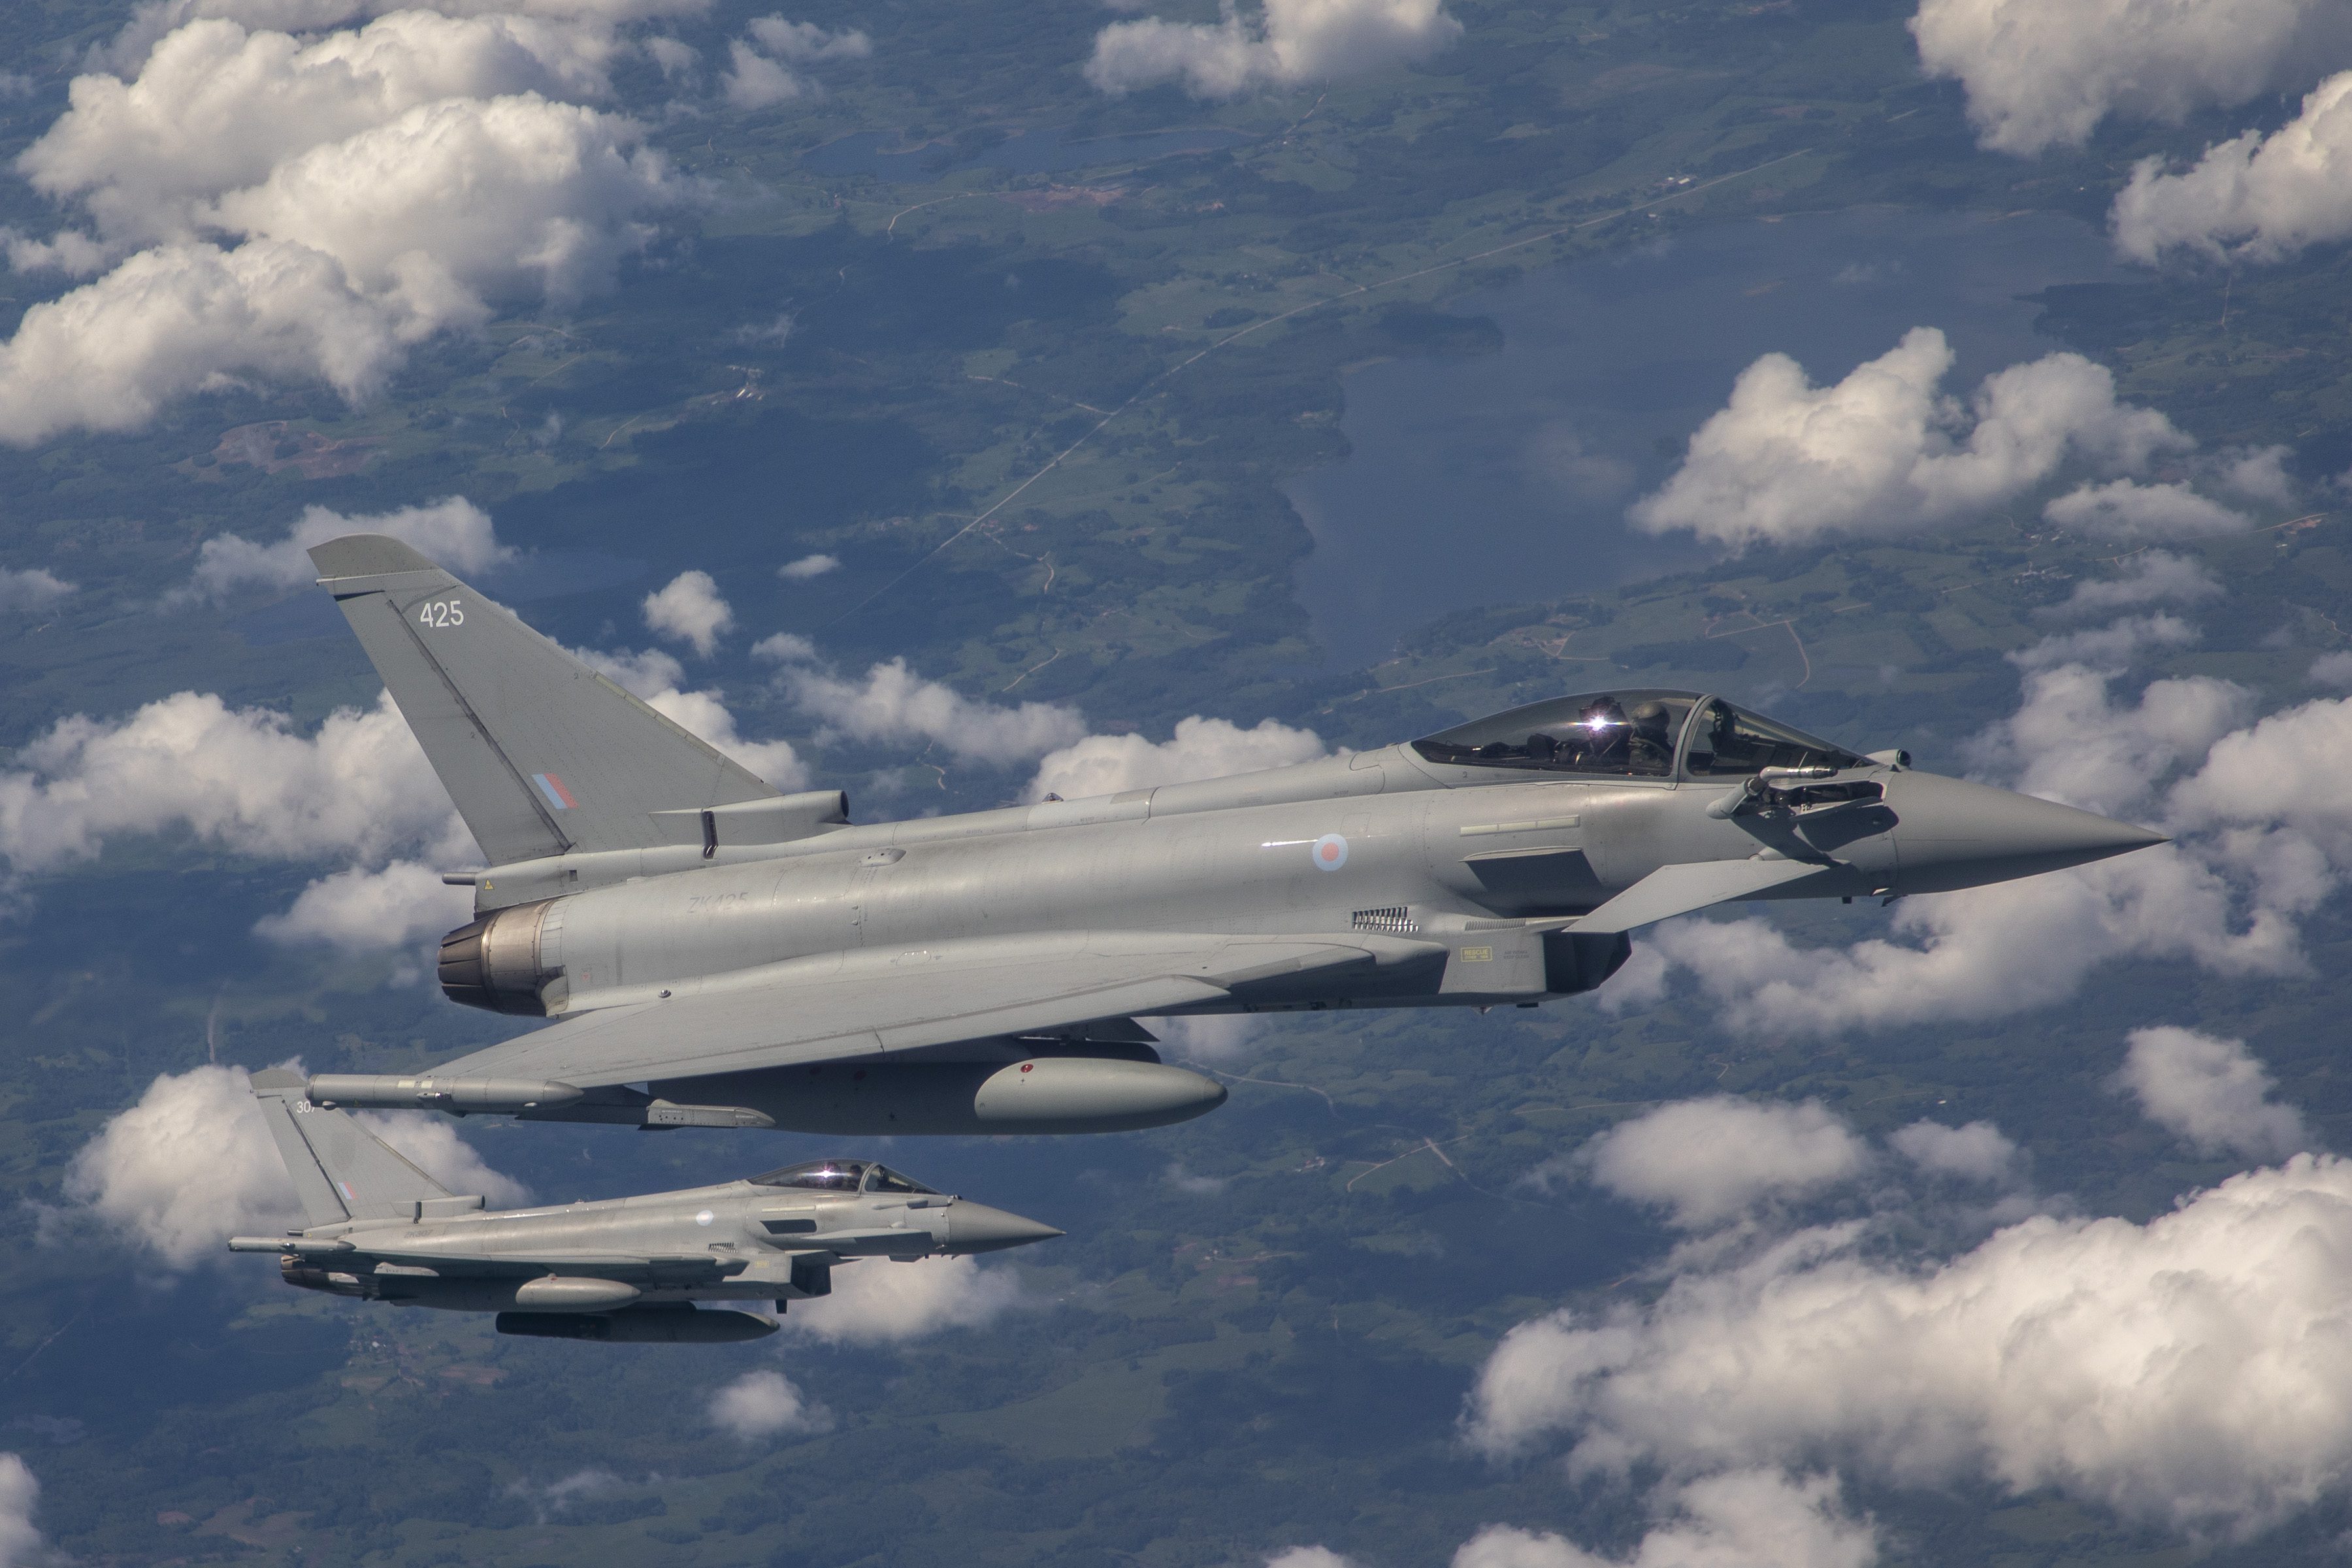 Two Typhoons in flight above the clouds.